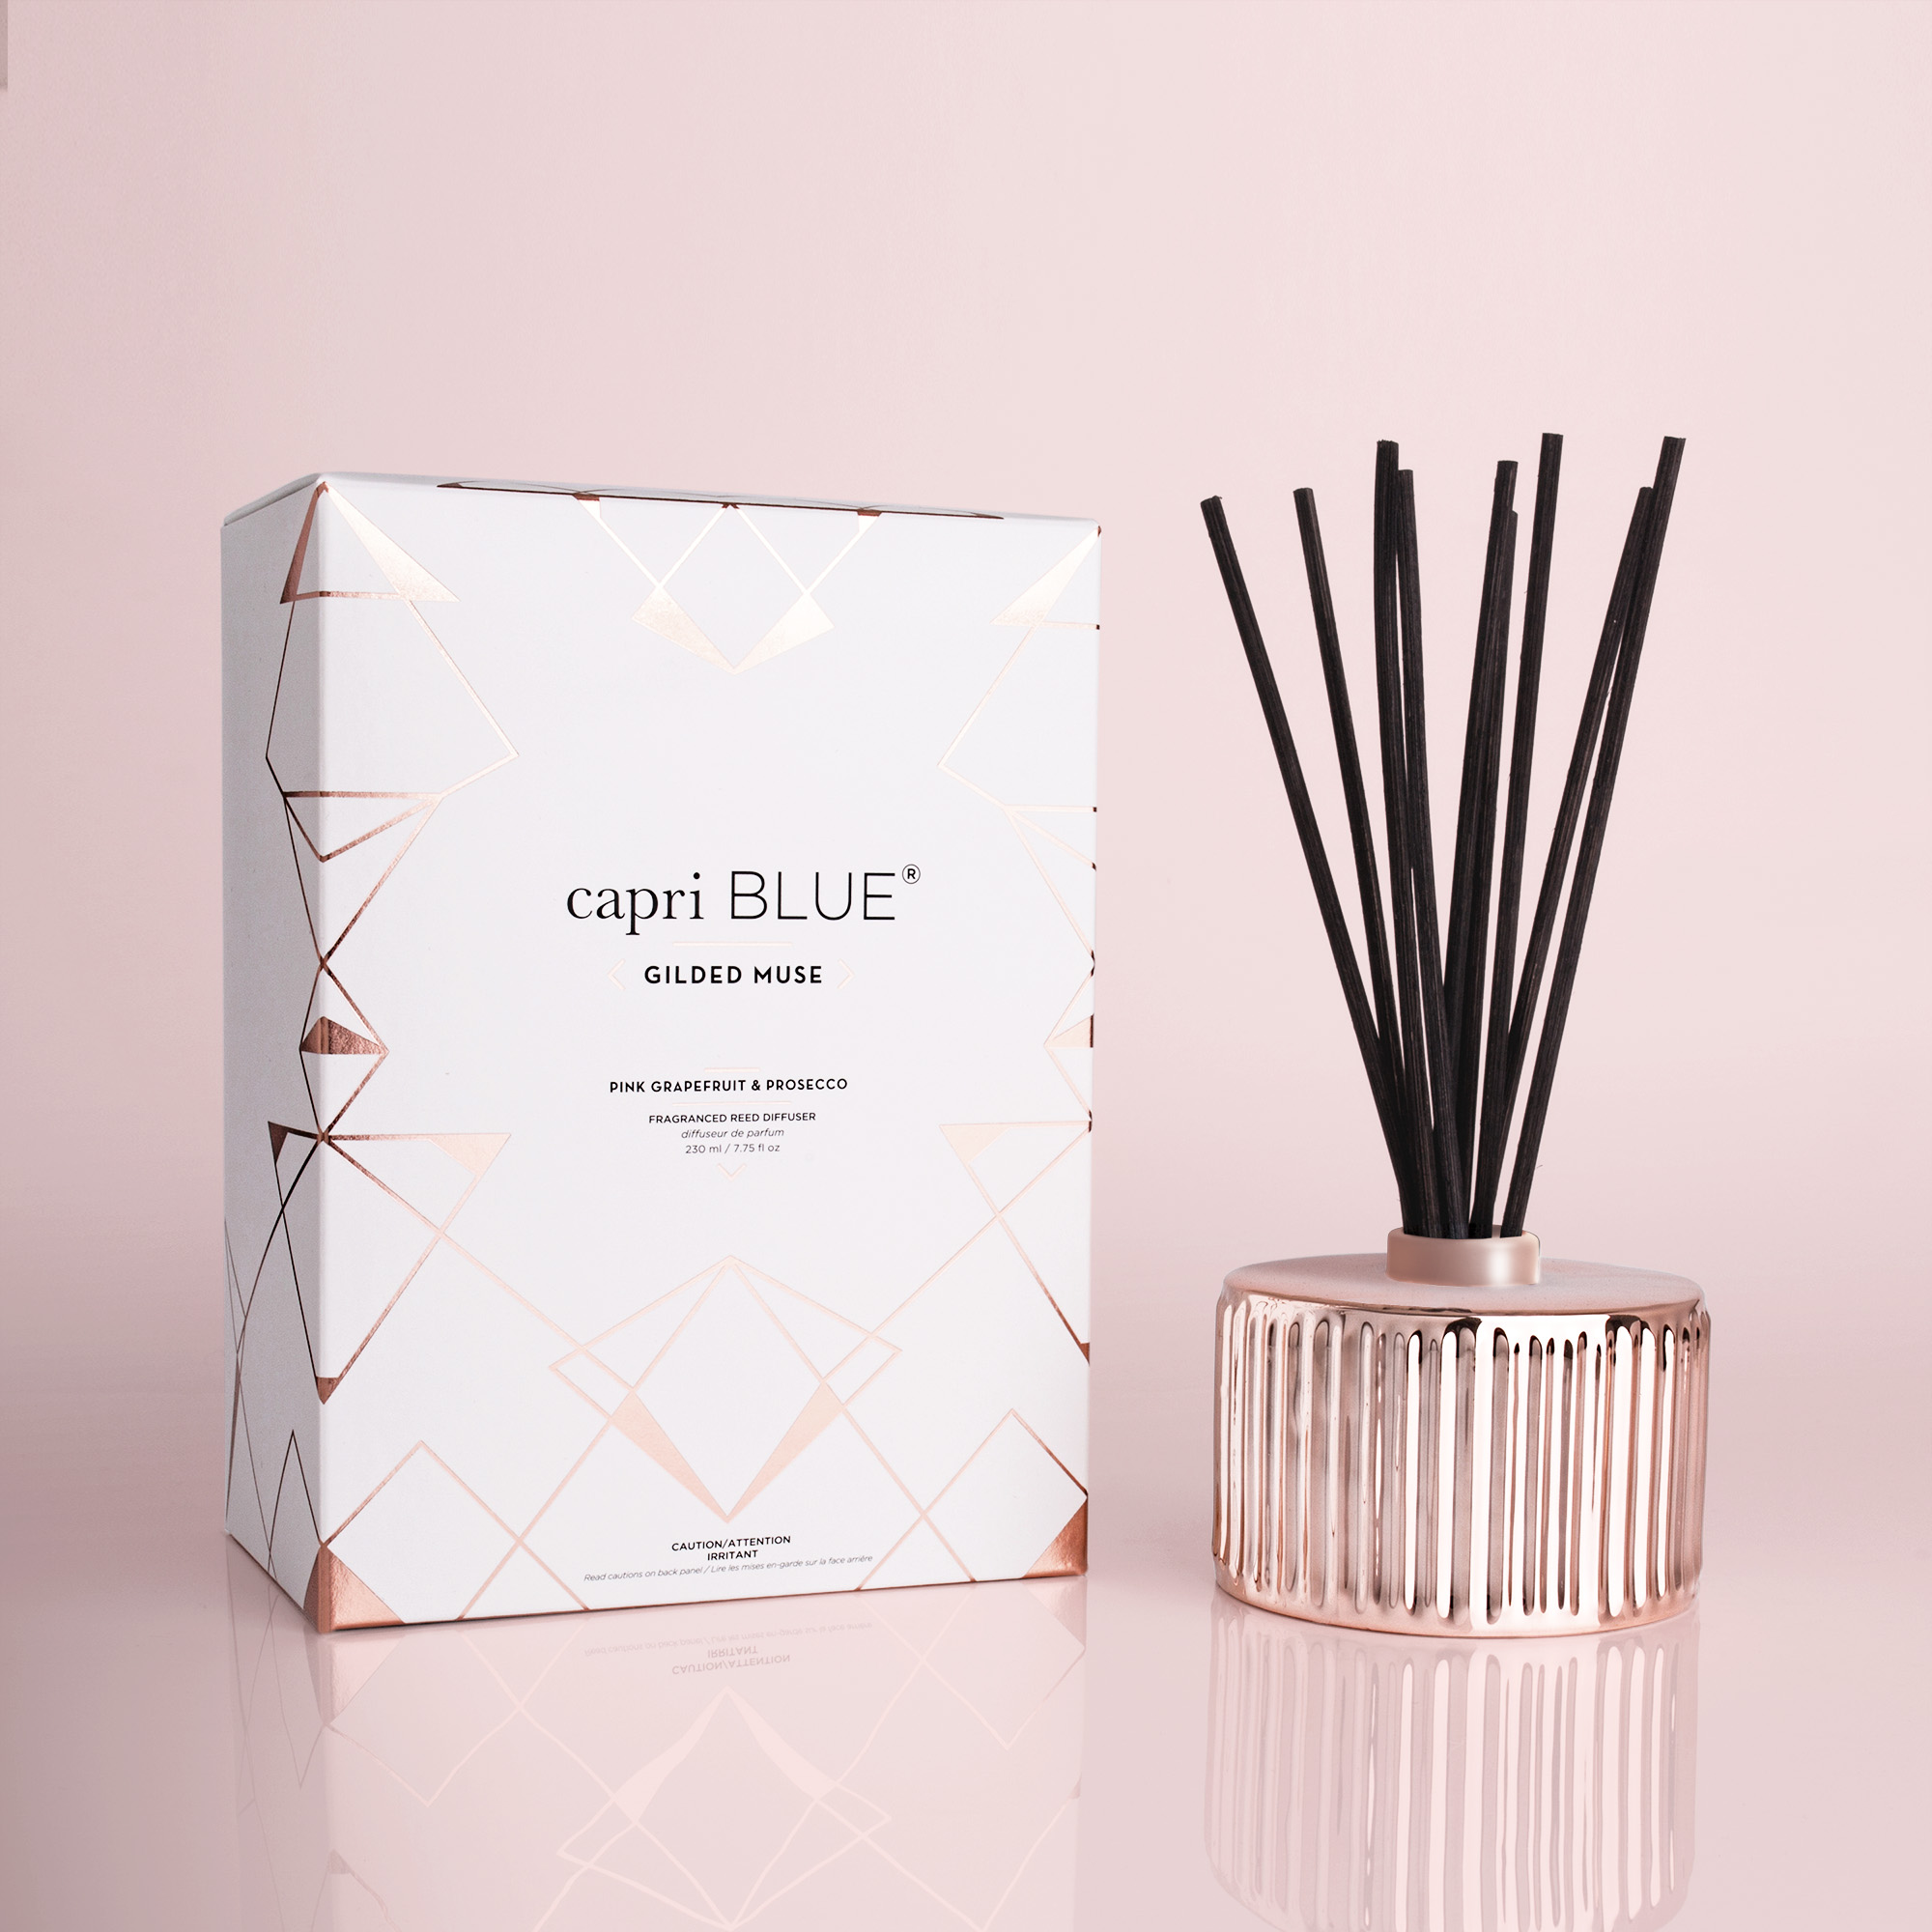 https://www.capri-blue.com/on/demandware.static/-/Sites-products-capri-blue/default/dw7c0cec14/images/products/Gilded%20Muse/pink-grapefruit-and-prosecco-gilded-reed-diffuser-MU-550-PGP-1.jpg